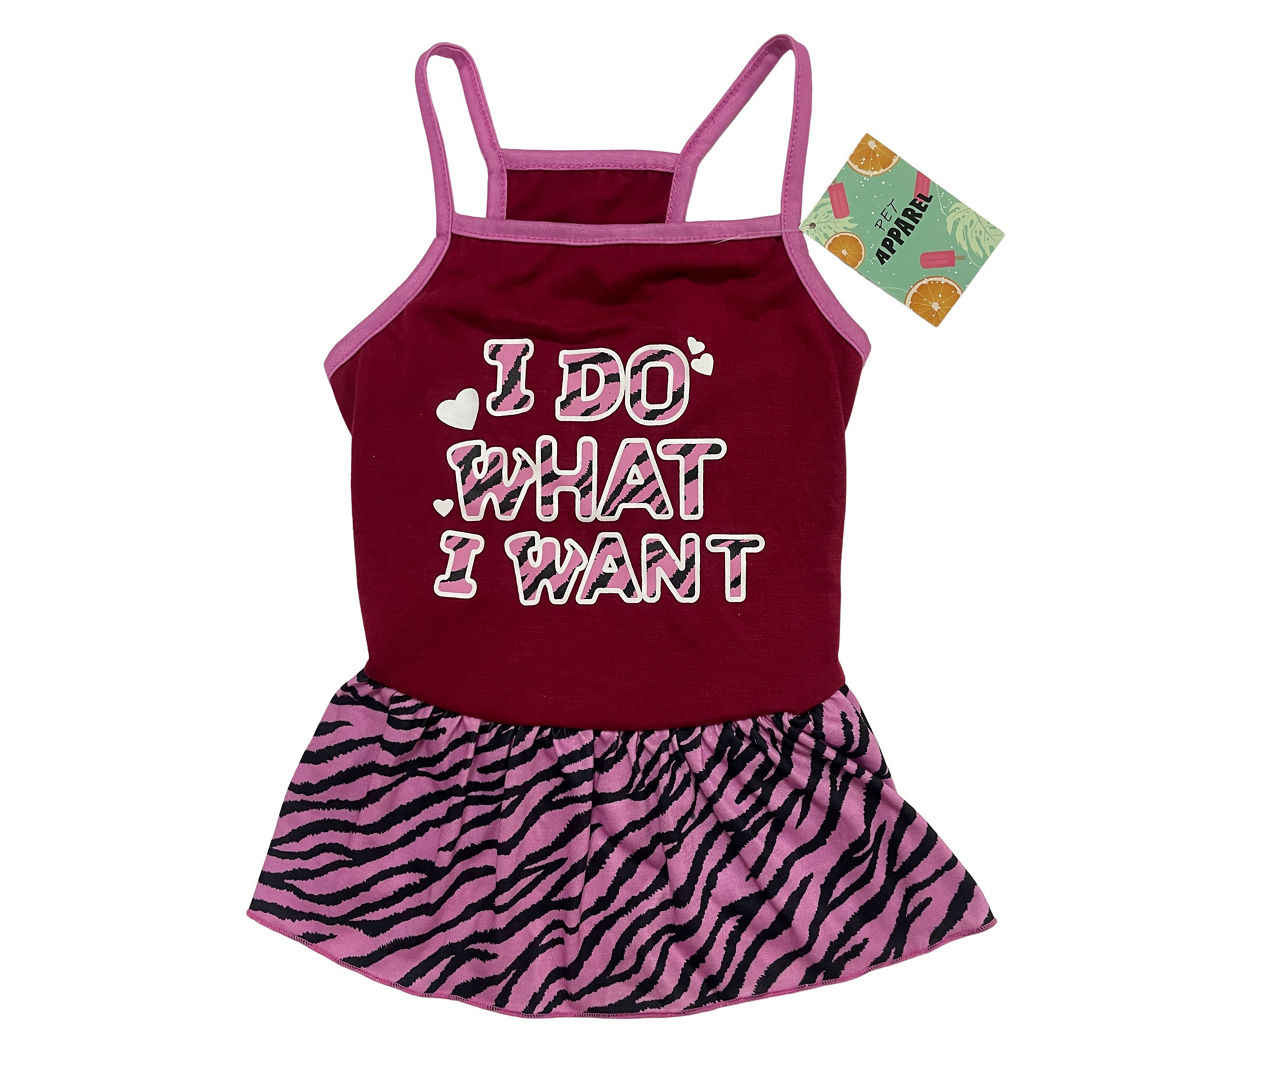 Pet X-Small "I Do What I Want" Red & Pink Zebra Dress